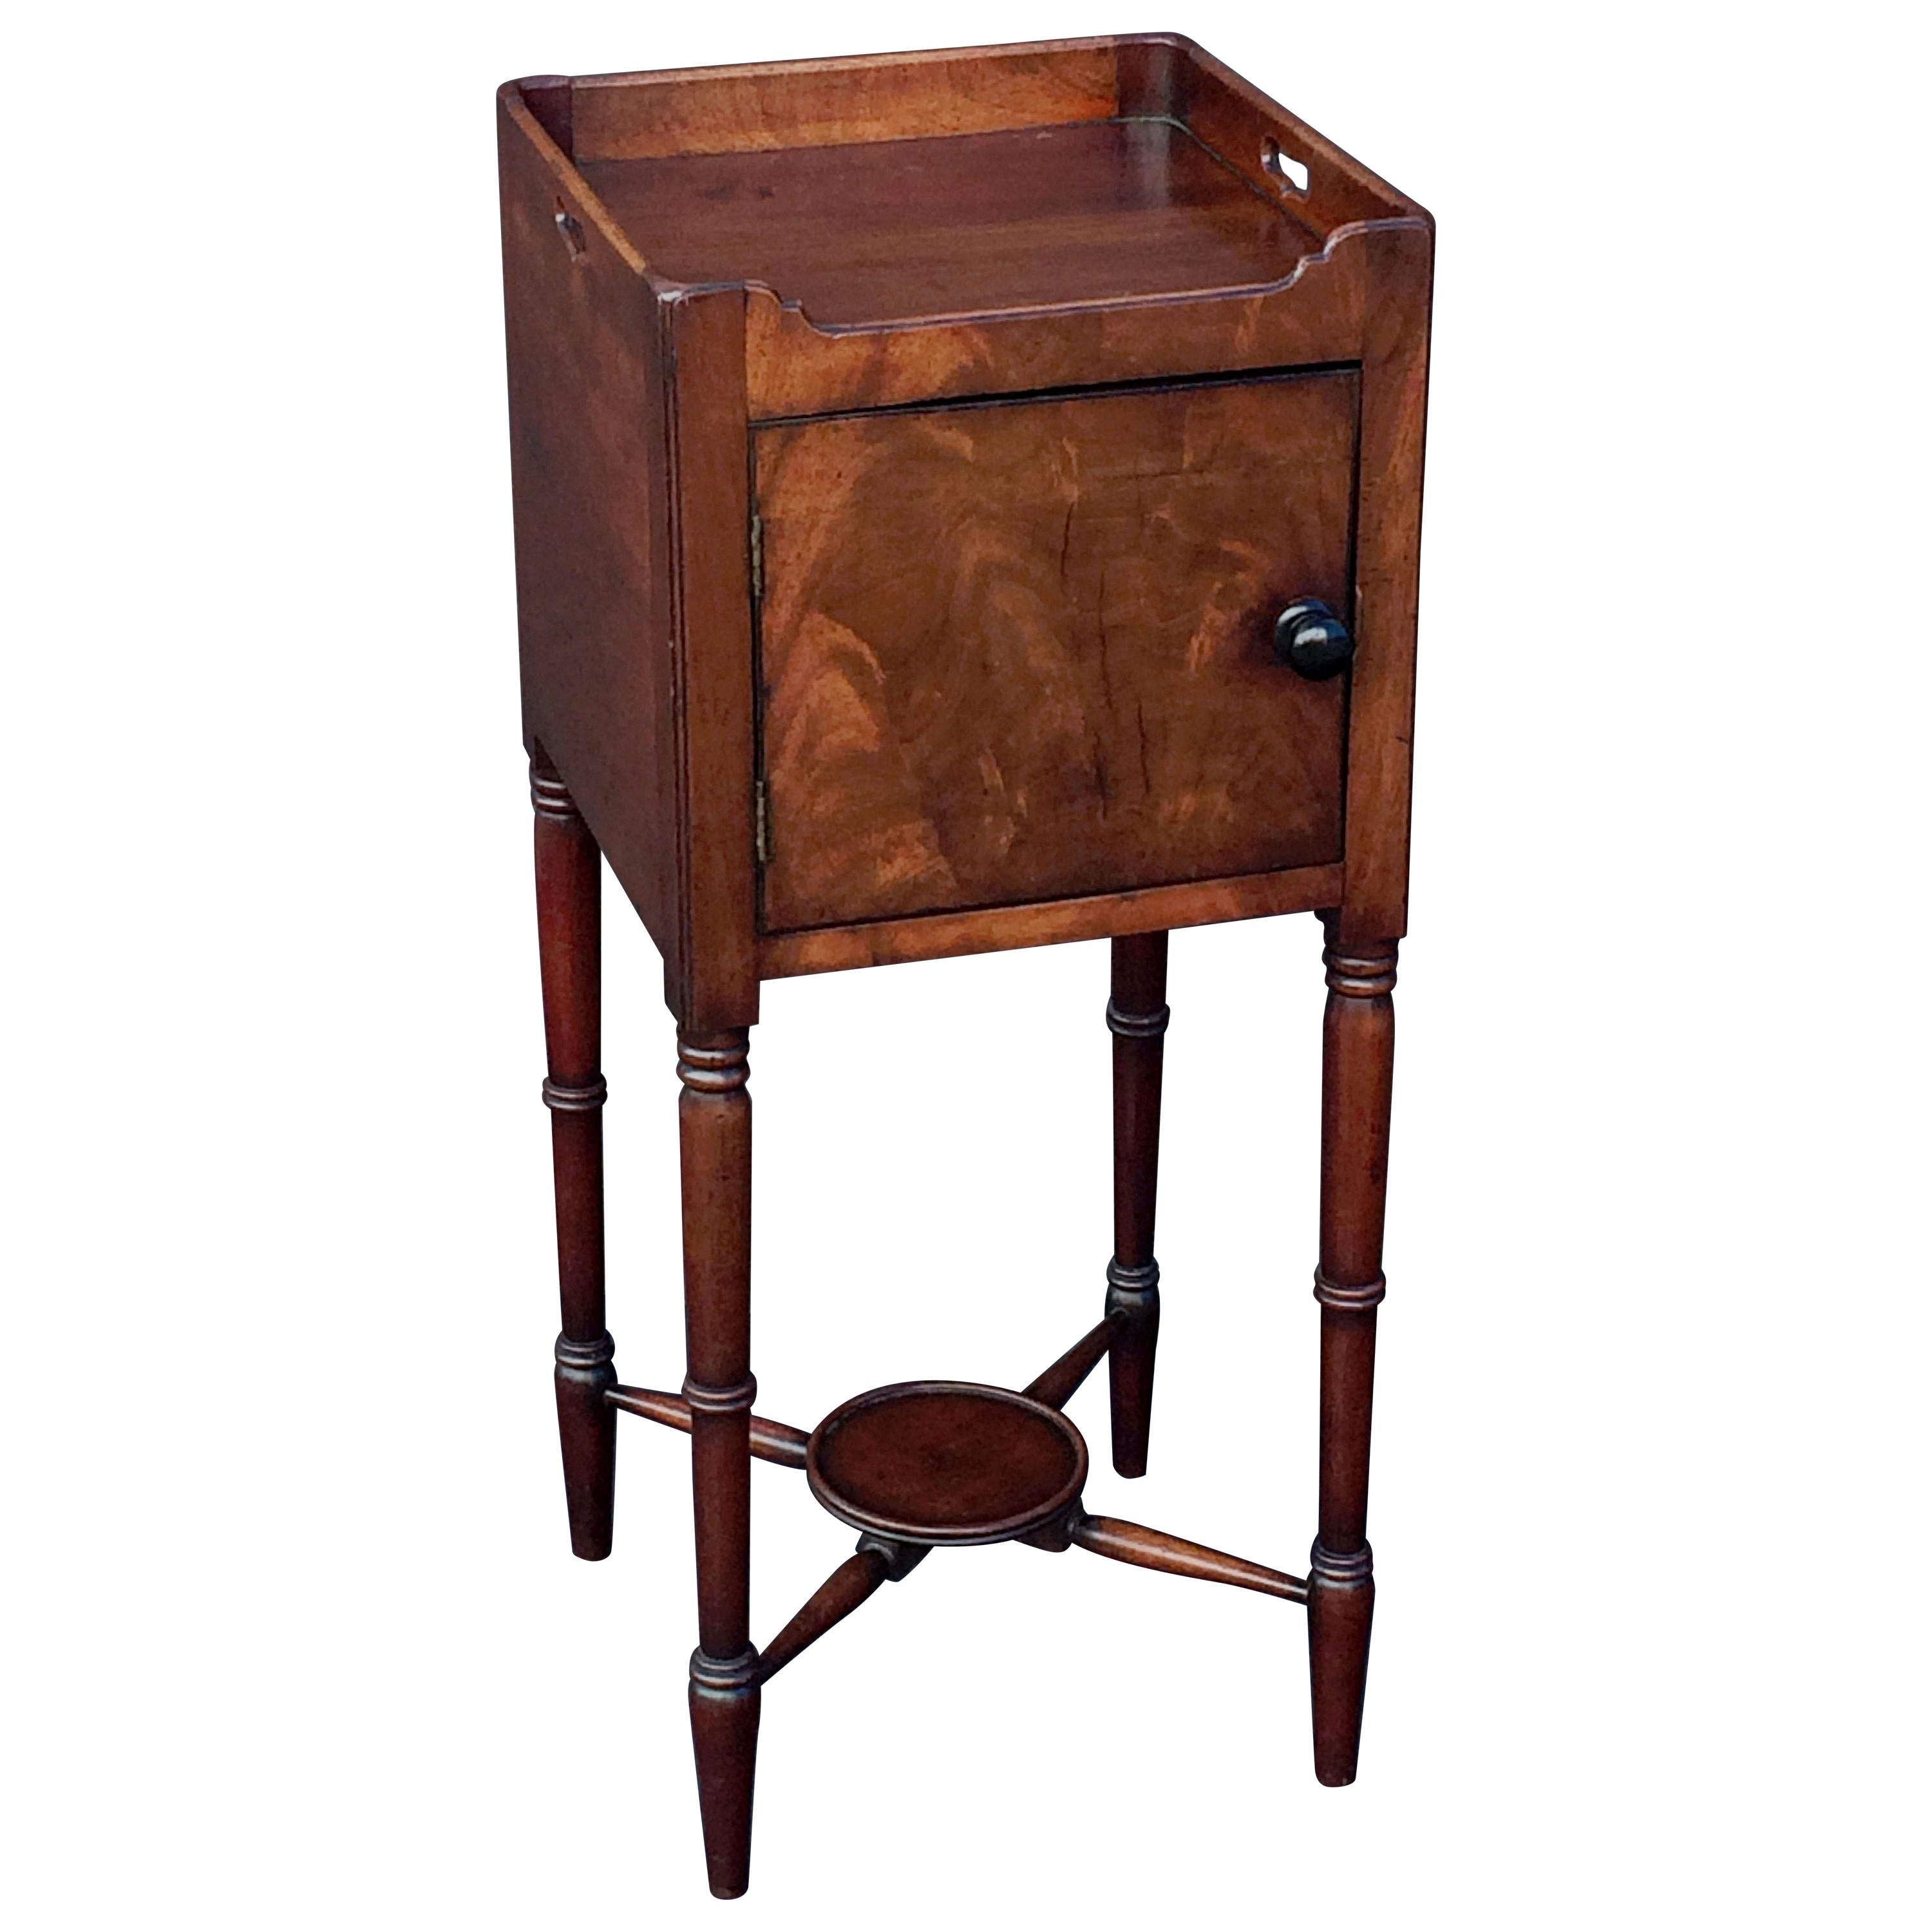 English Bedside Table or Nightstand of Mahogany from the William IV Era